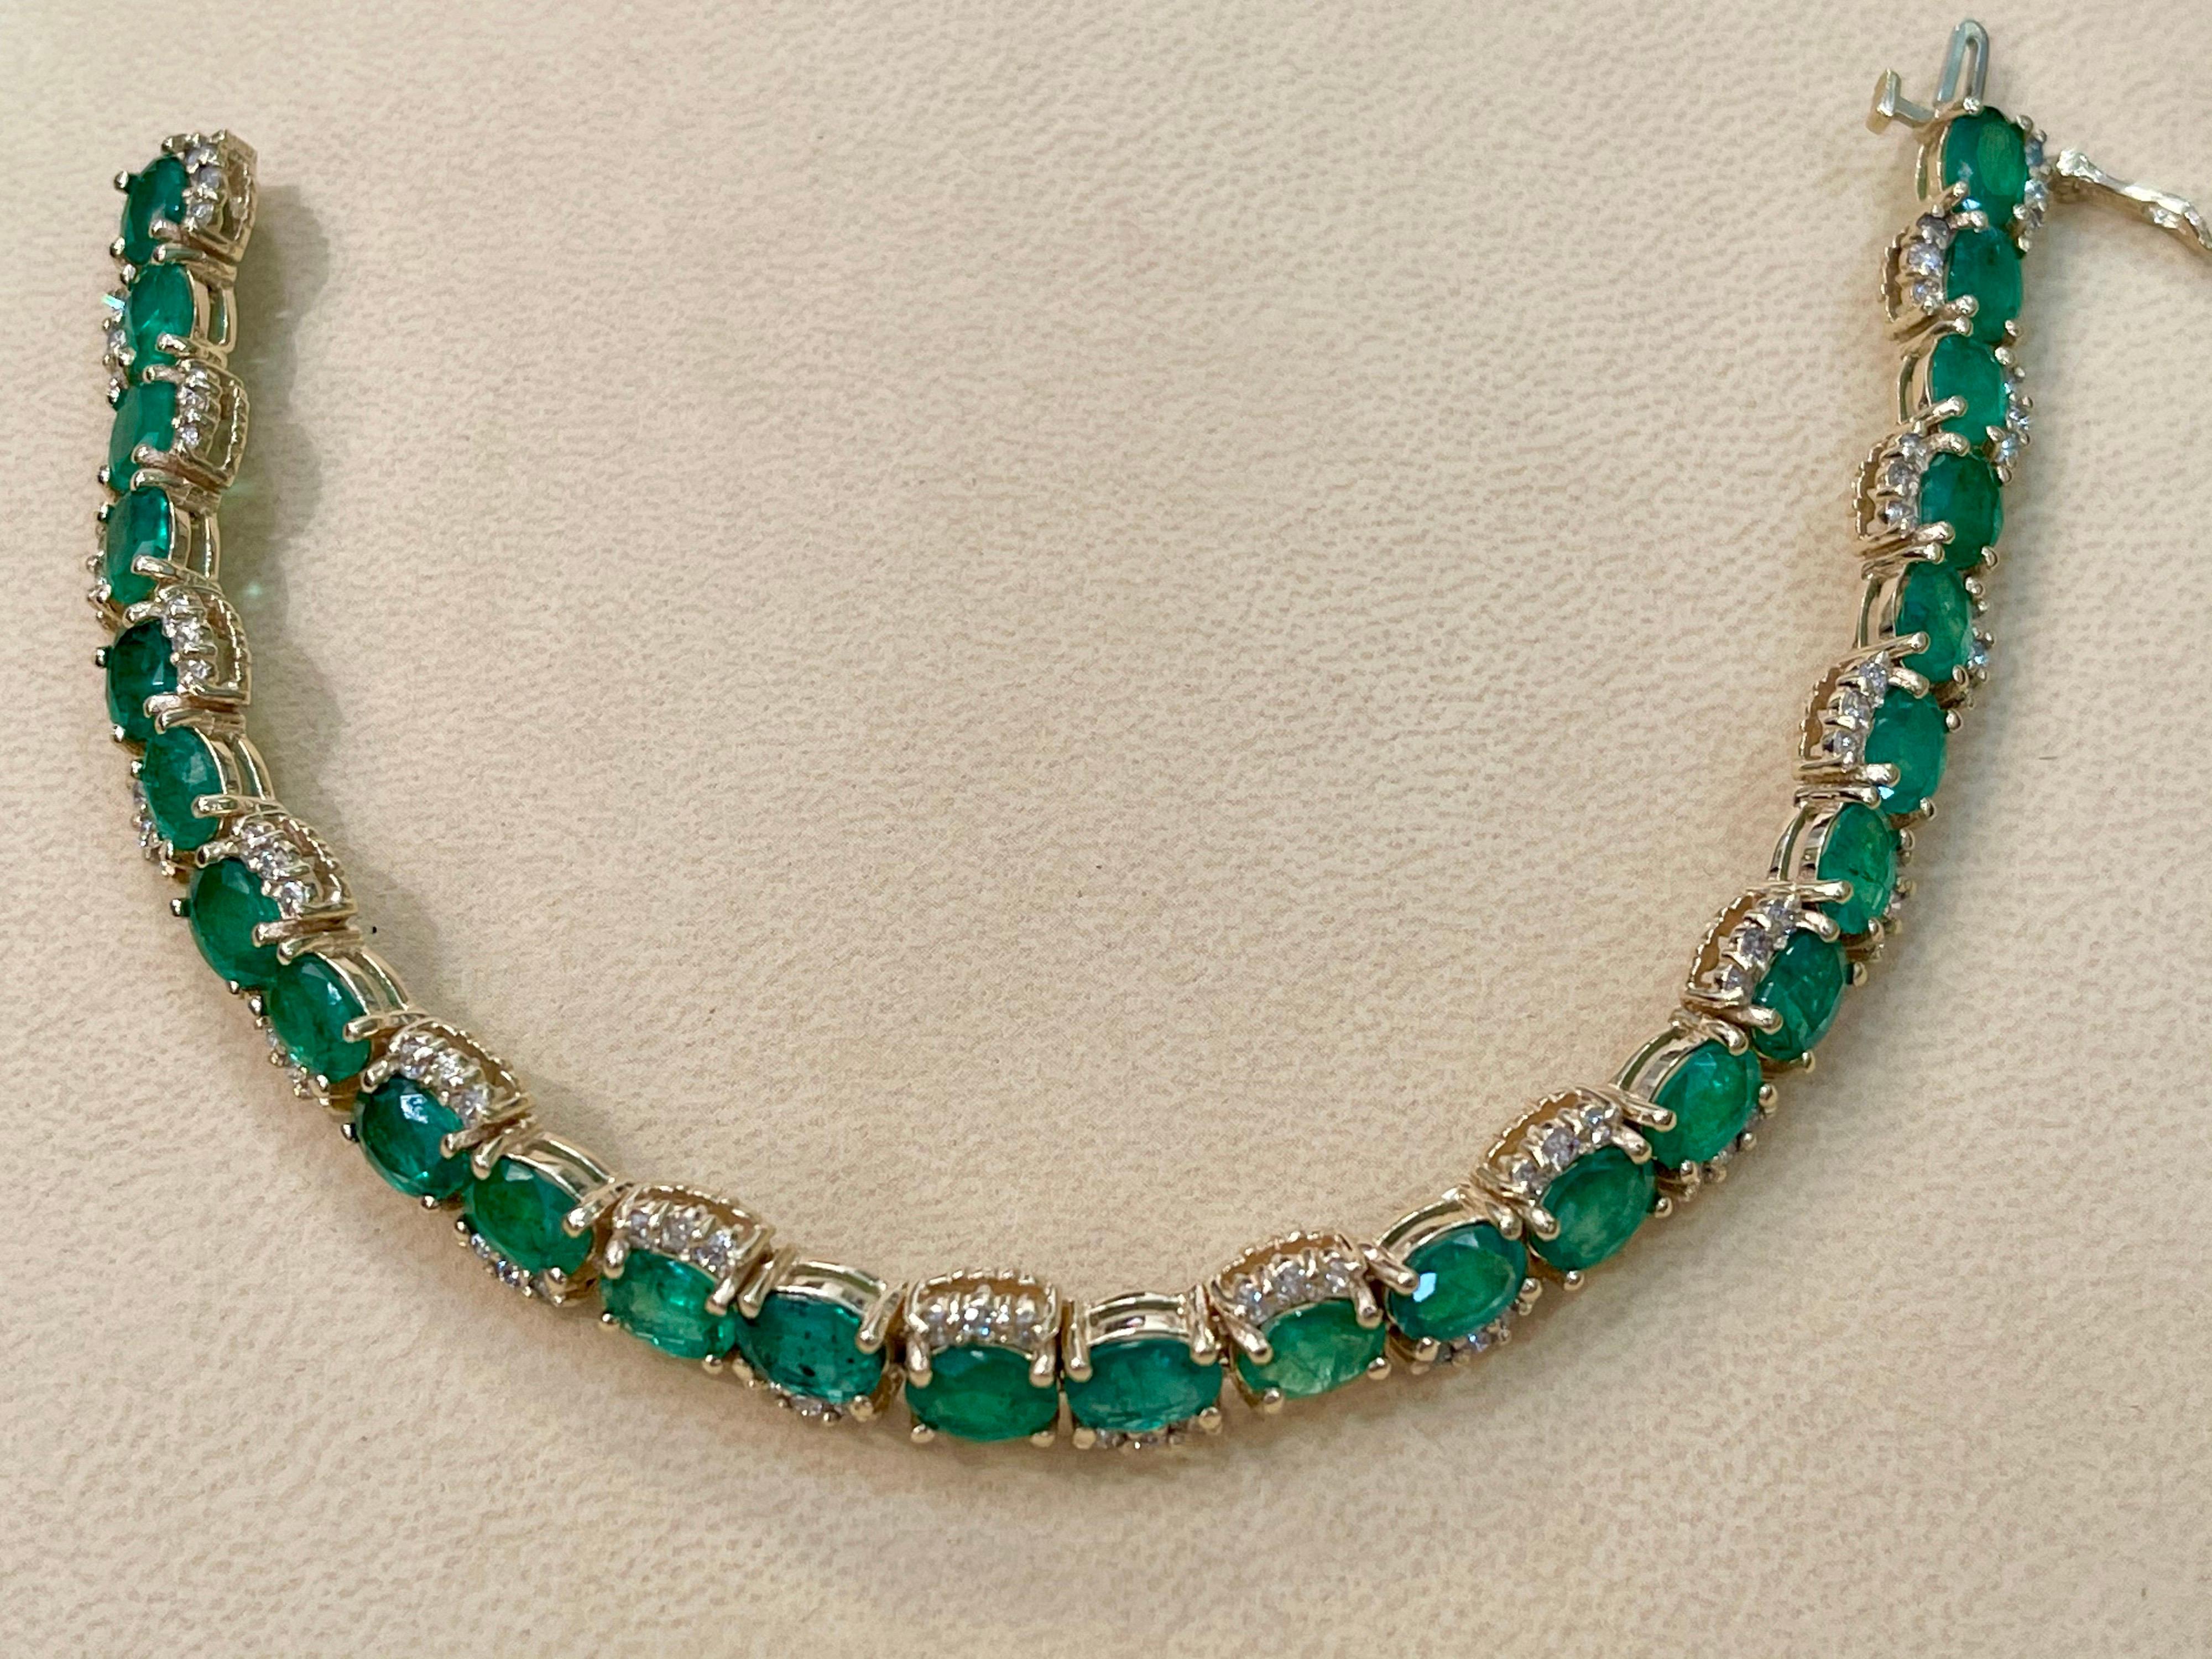 21 Carat Natural Brazil Emerald & 2.6 Ct Diamond Tennis Bracelet 14 Karat Y Gold In New Condition For Sale In New York, NY